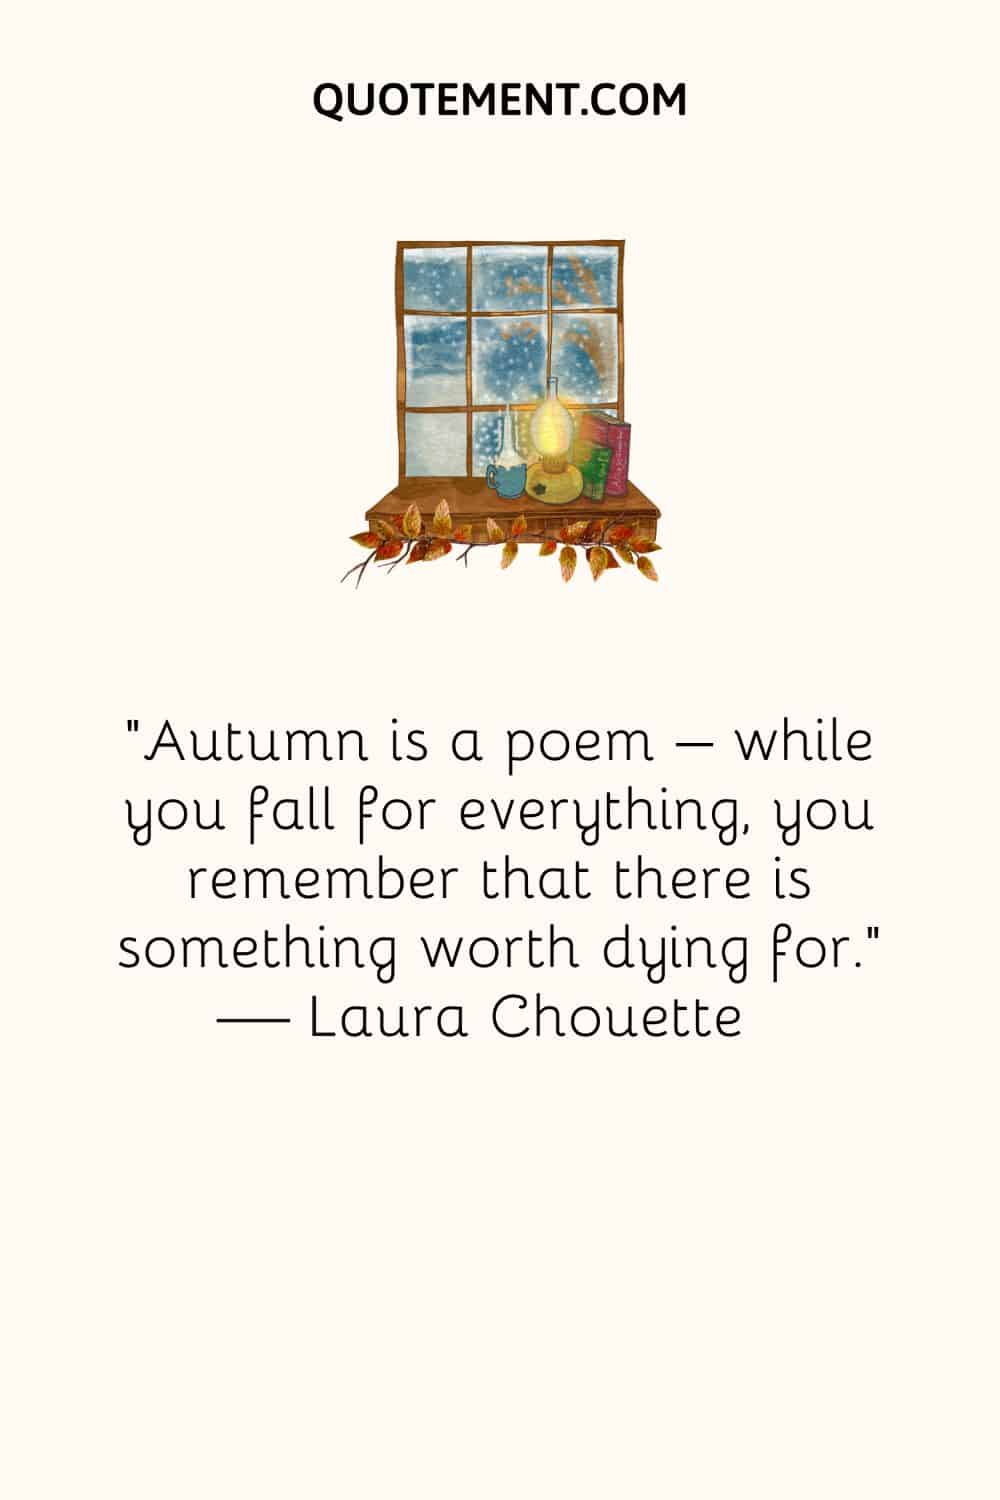 Autumn is a poem – while you fall for everything, you remember that there is something worth dying for